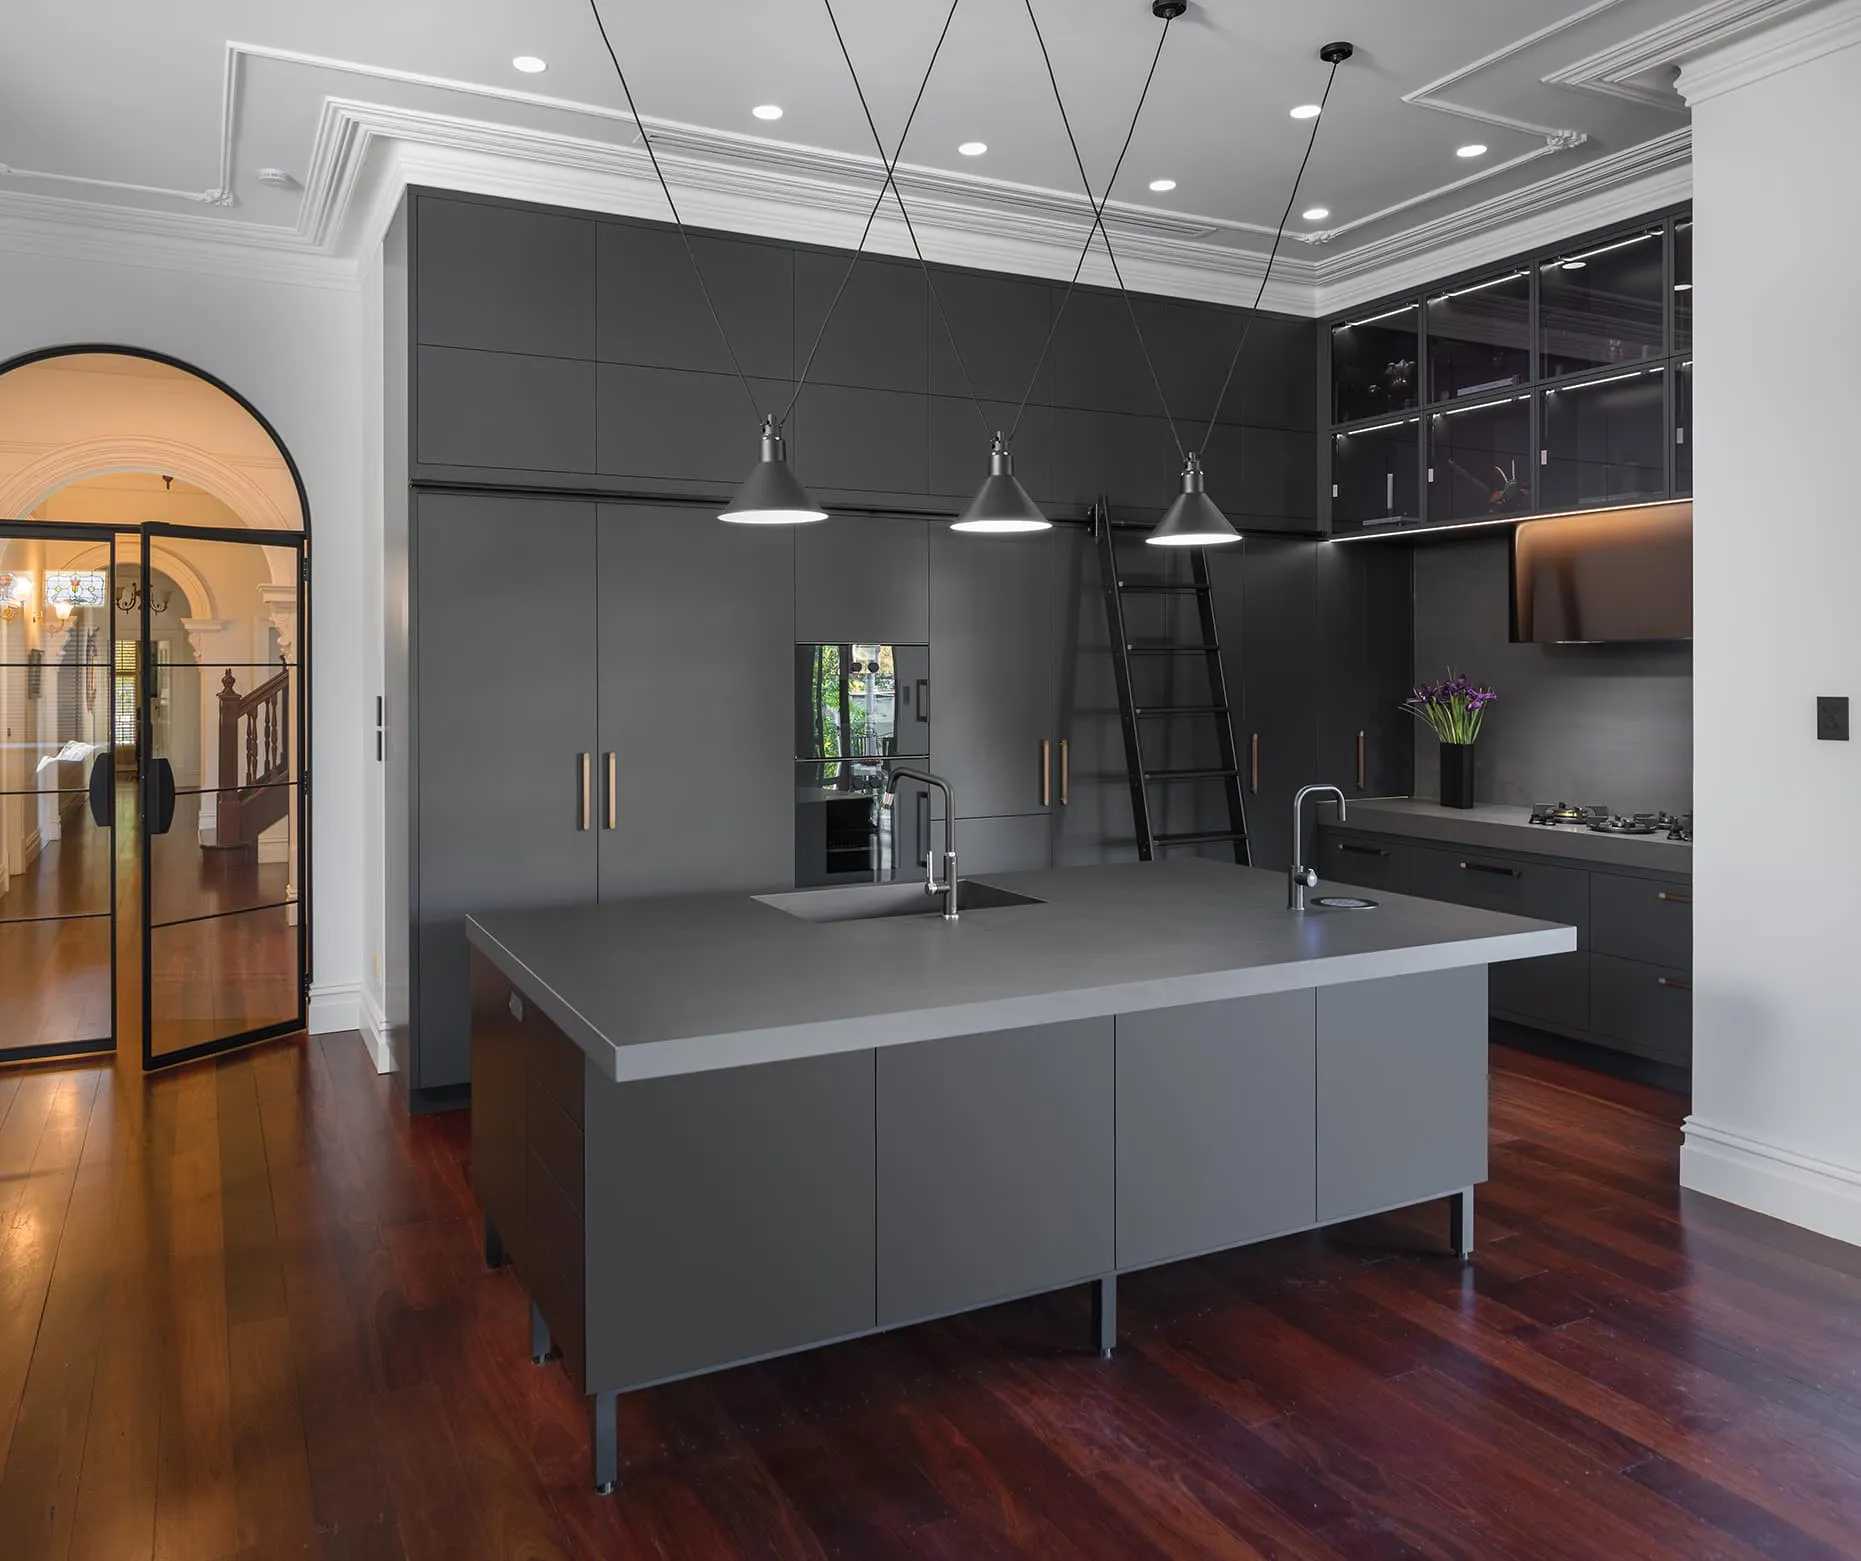 A photo of a kitchen, all black, with a kitchen island table and cabinets in the background.